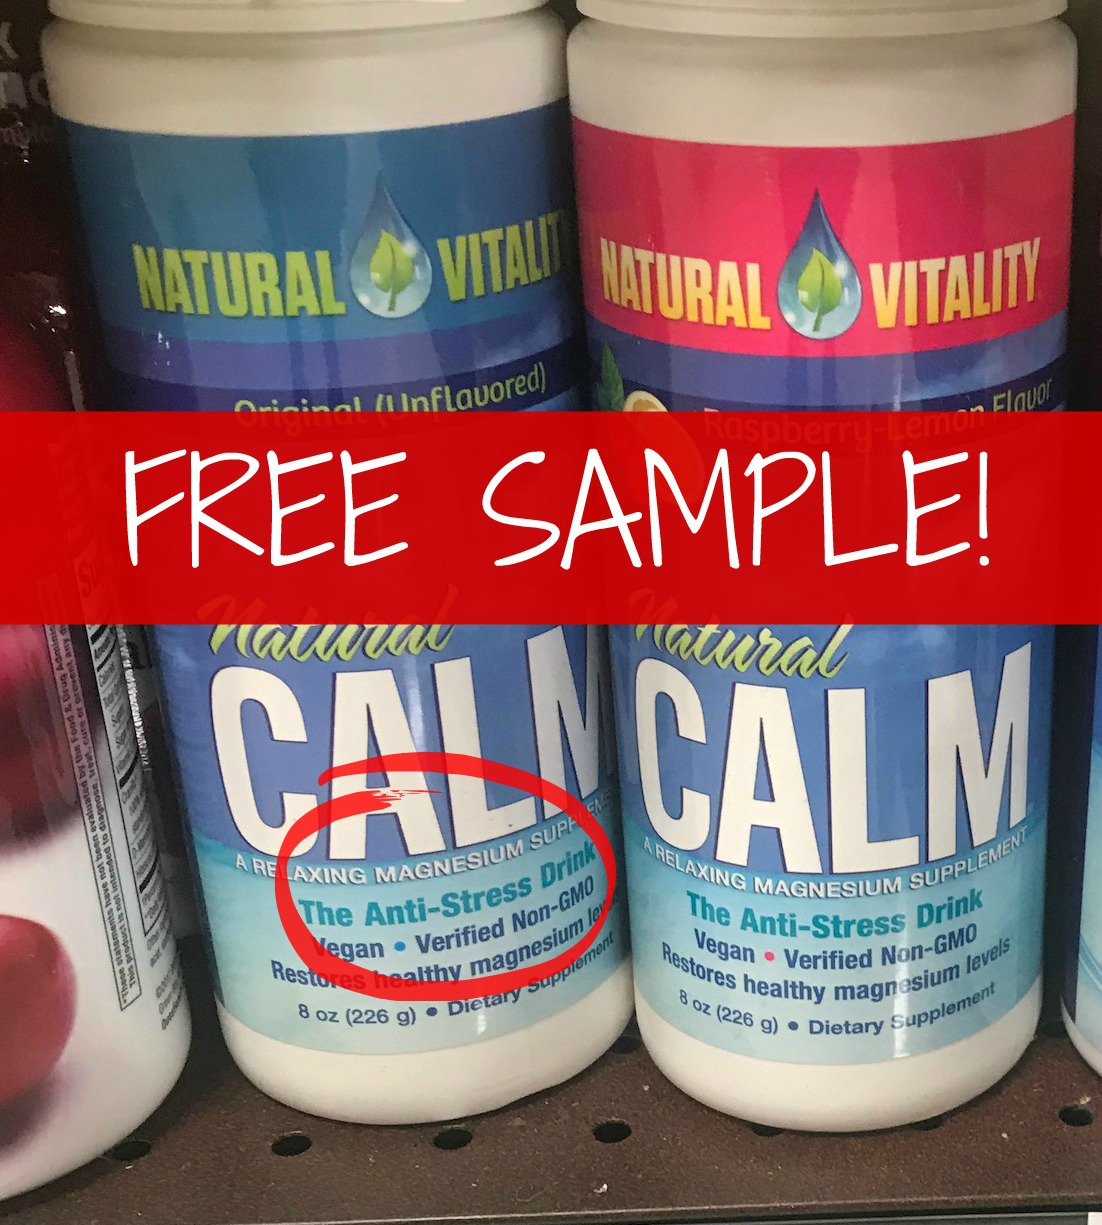 Free Sample of Natural Calm (The Anti-Stress Drink)!